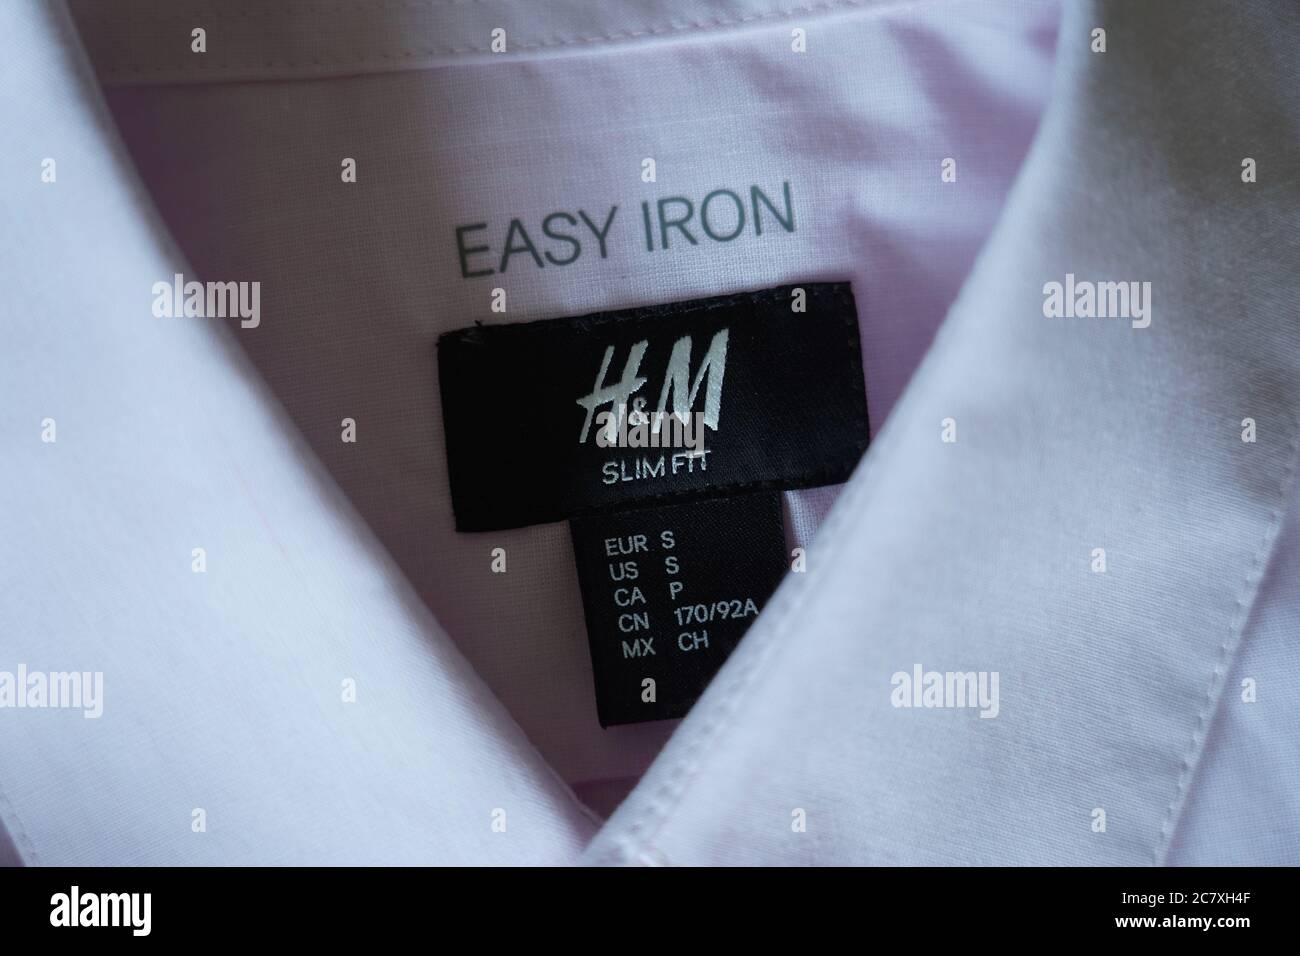 h&m slim fit easy iron size small dress shirt close up label Stock Photo